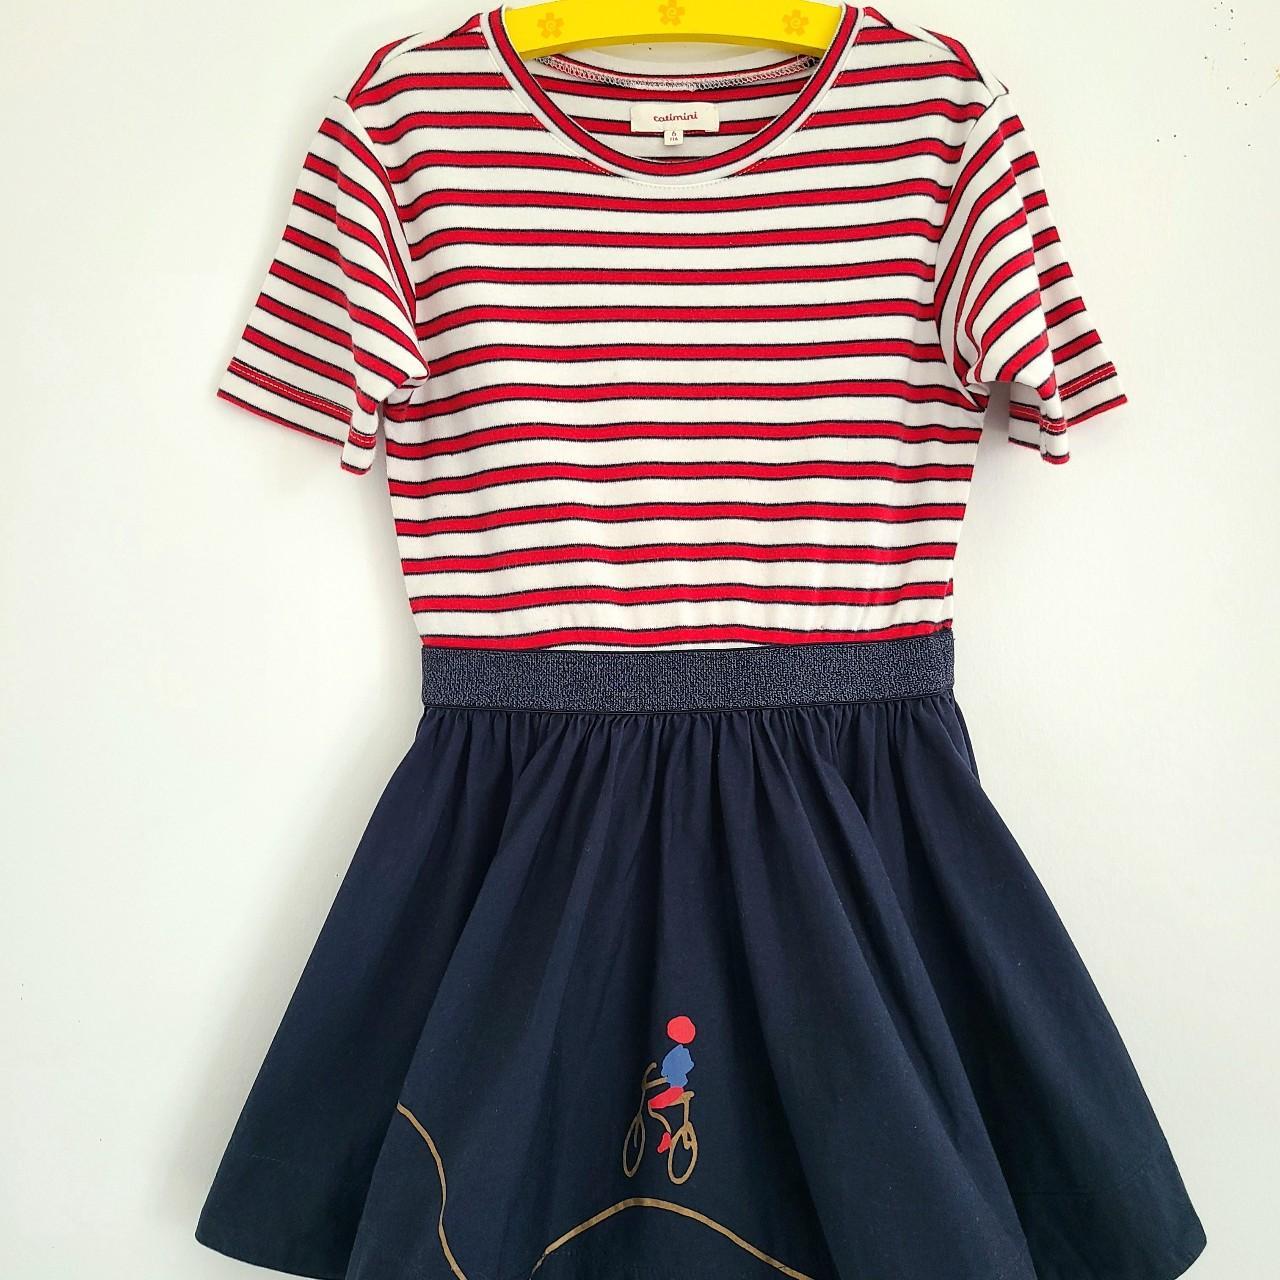 Catimini Red and Navy Dress